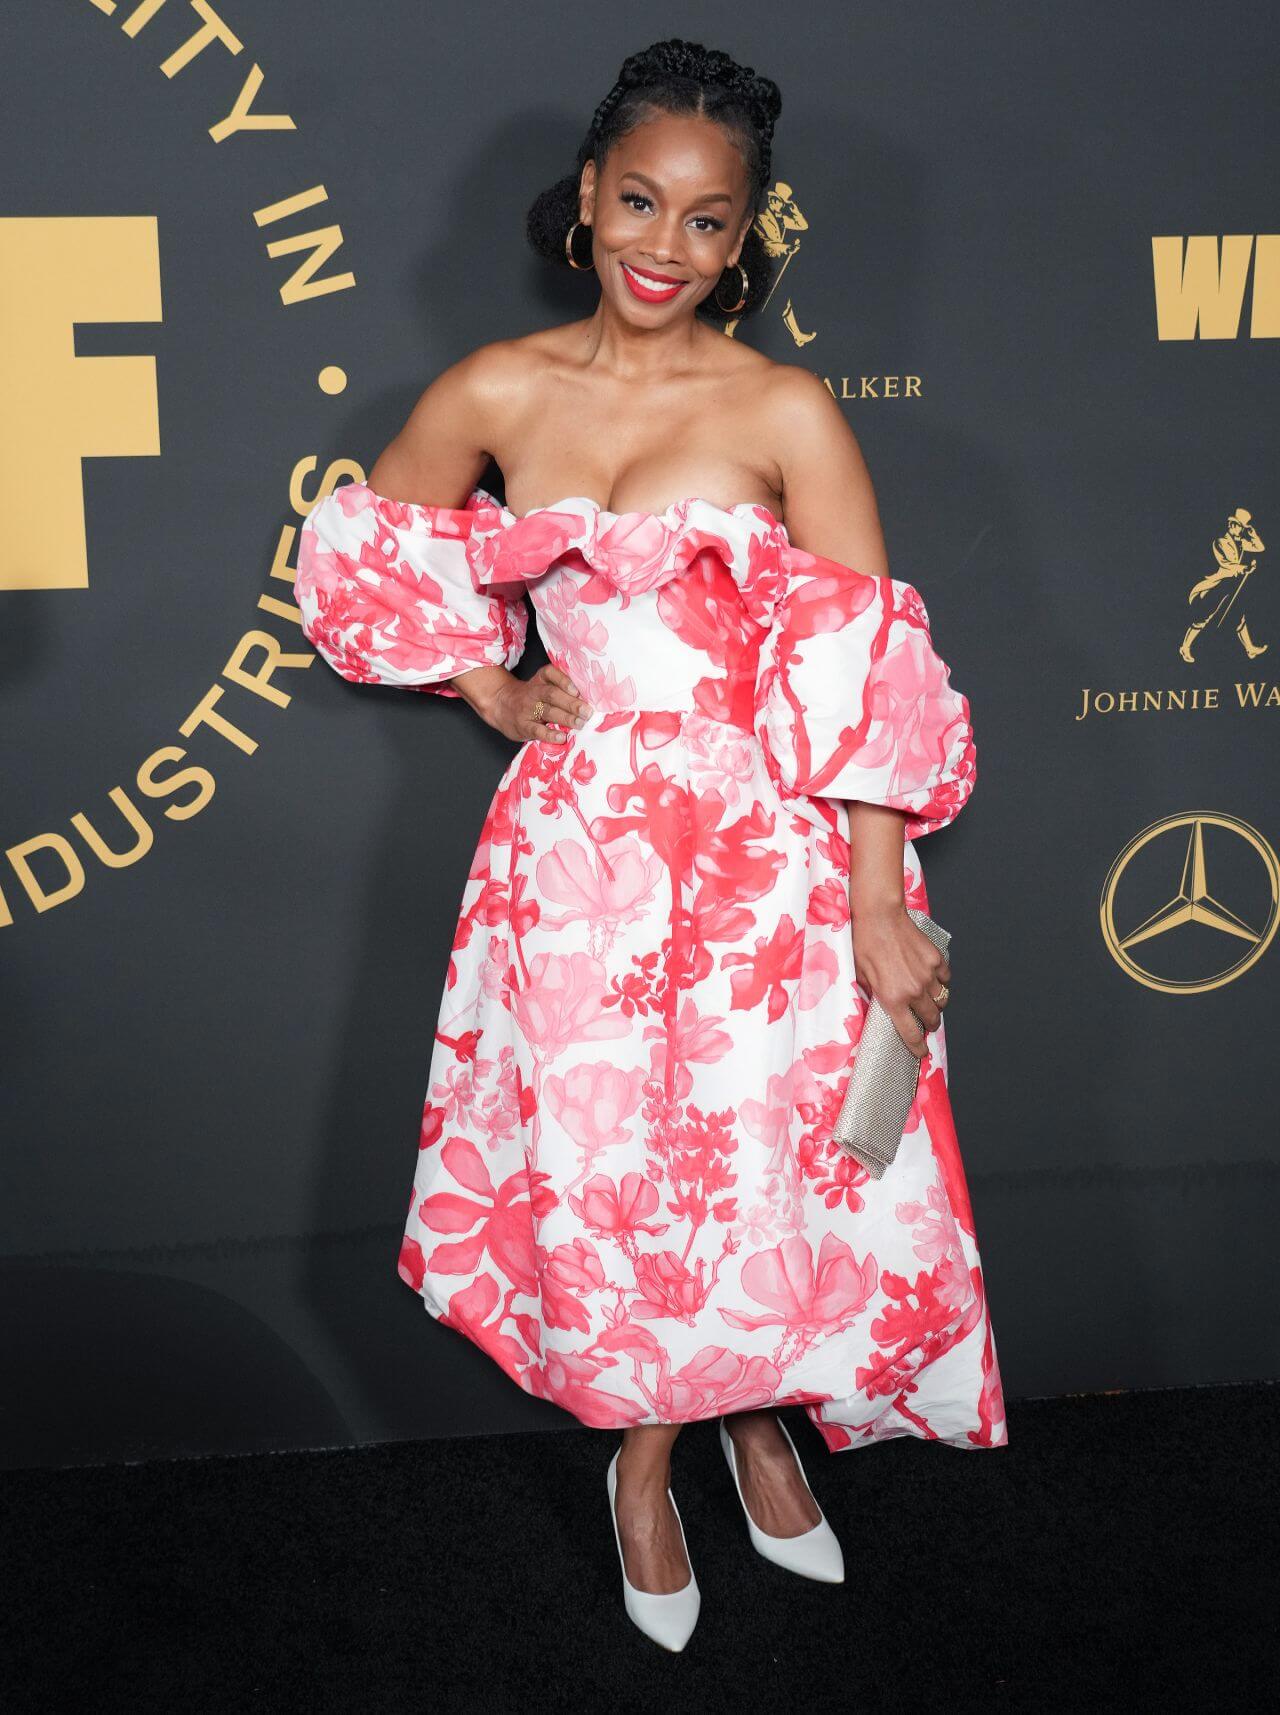 Anika Noni Rose In White Floral Printed With Baggy Sleeves Off Shoulder Gown At Women In Film Oscar Party in LA